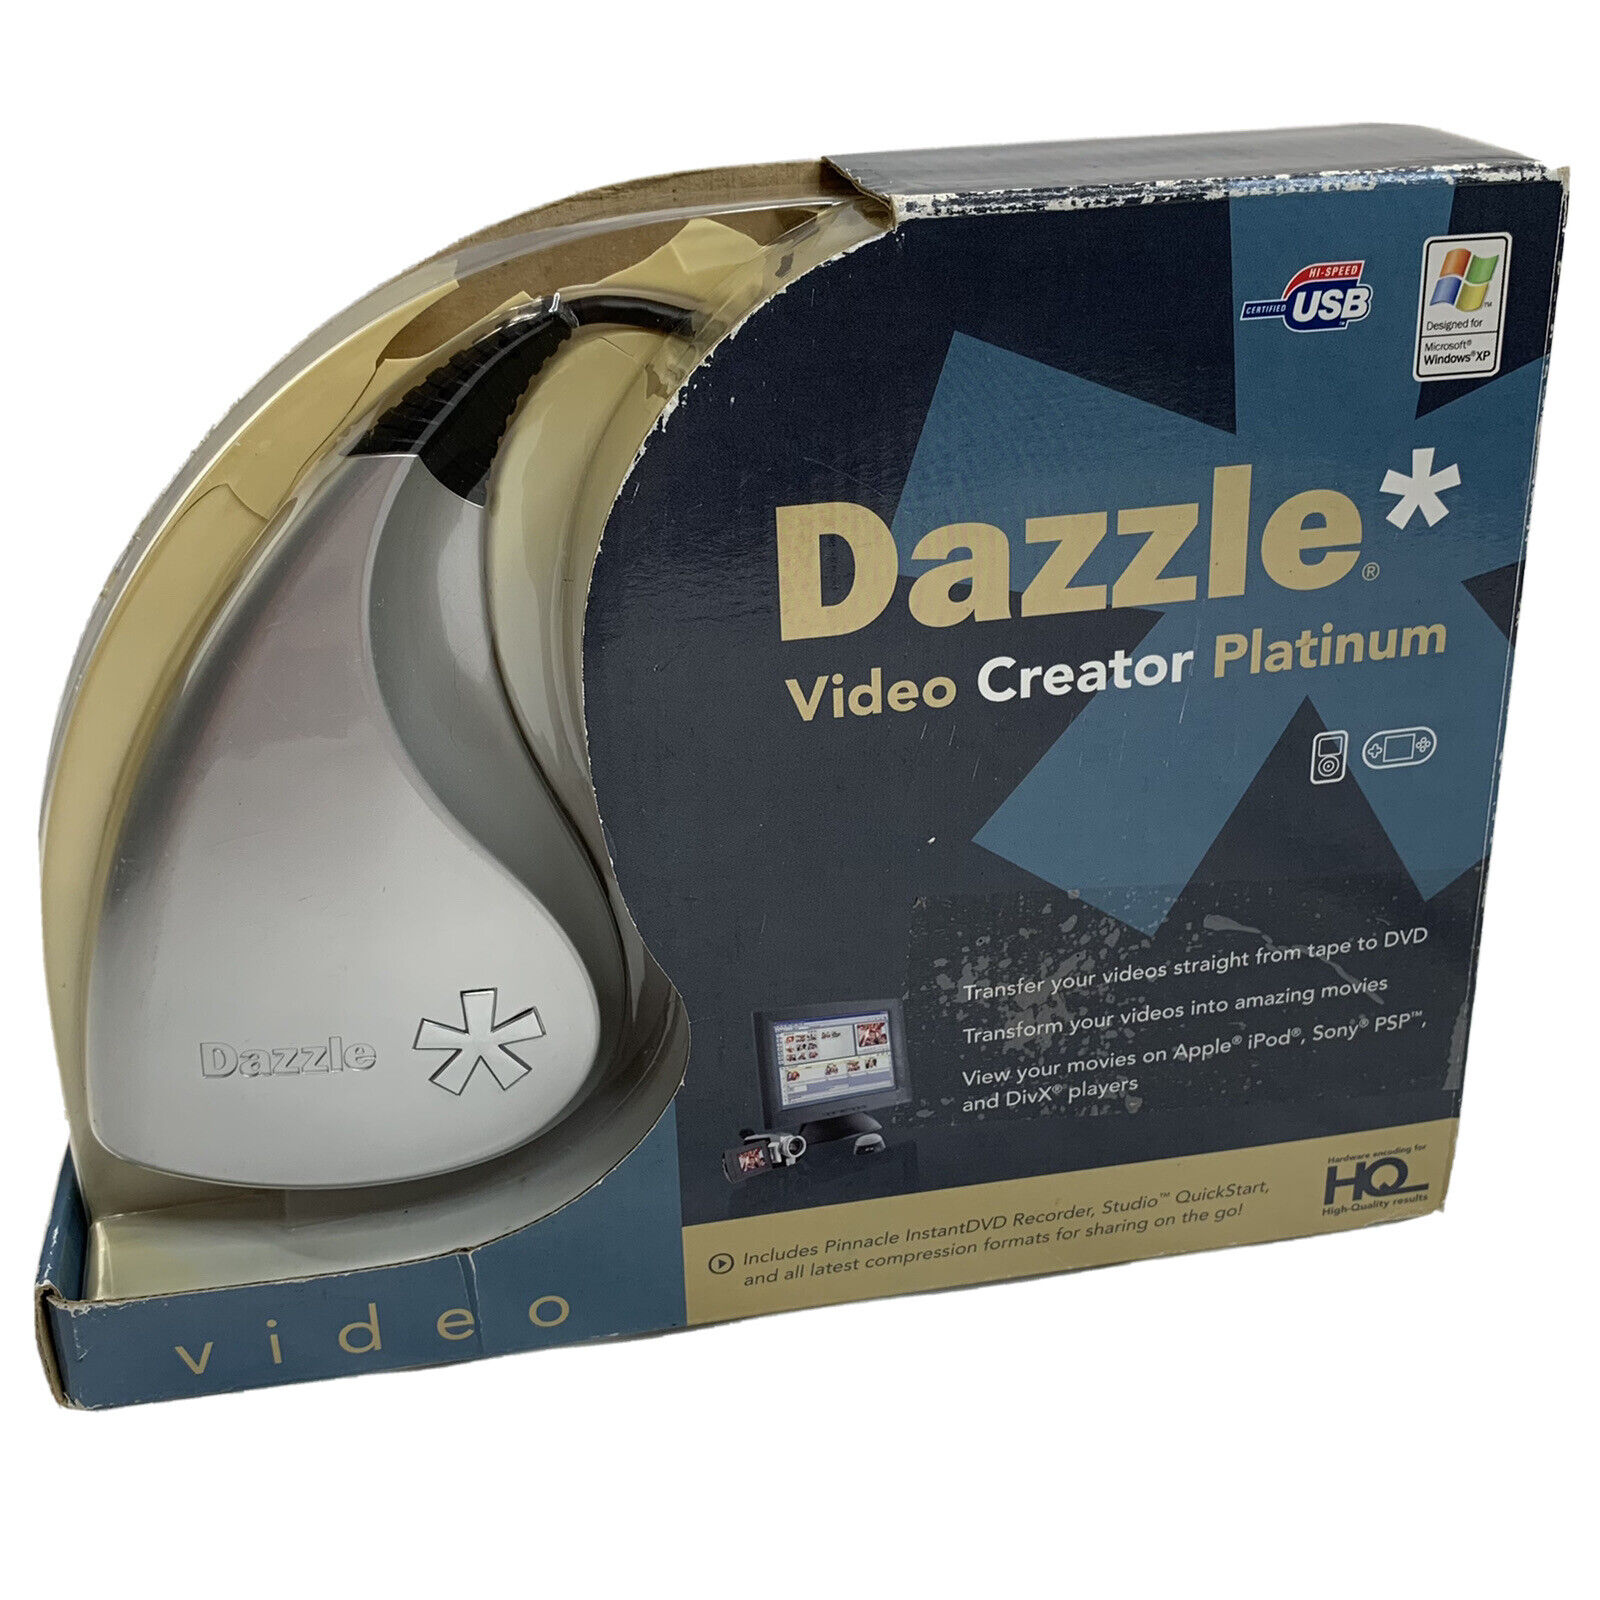 Pinnacle Dazzle Video Creator Platinum Transfer Home Movies Tape VHS to DVD